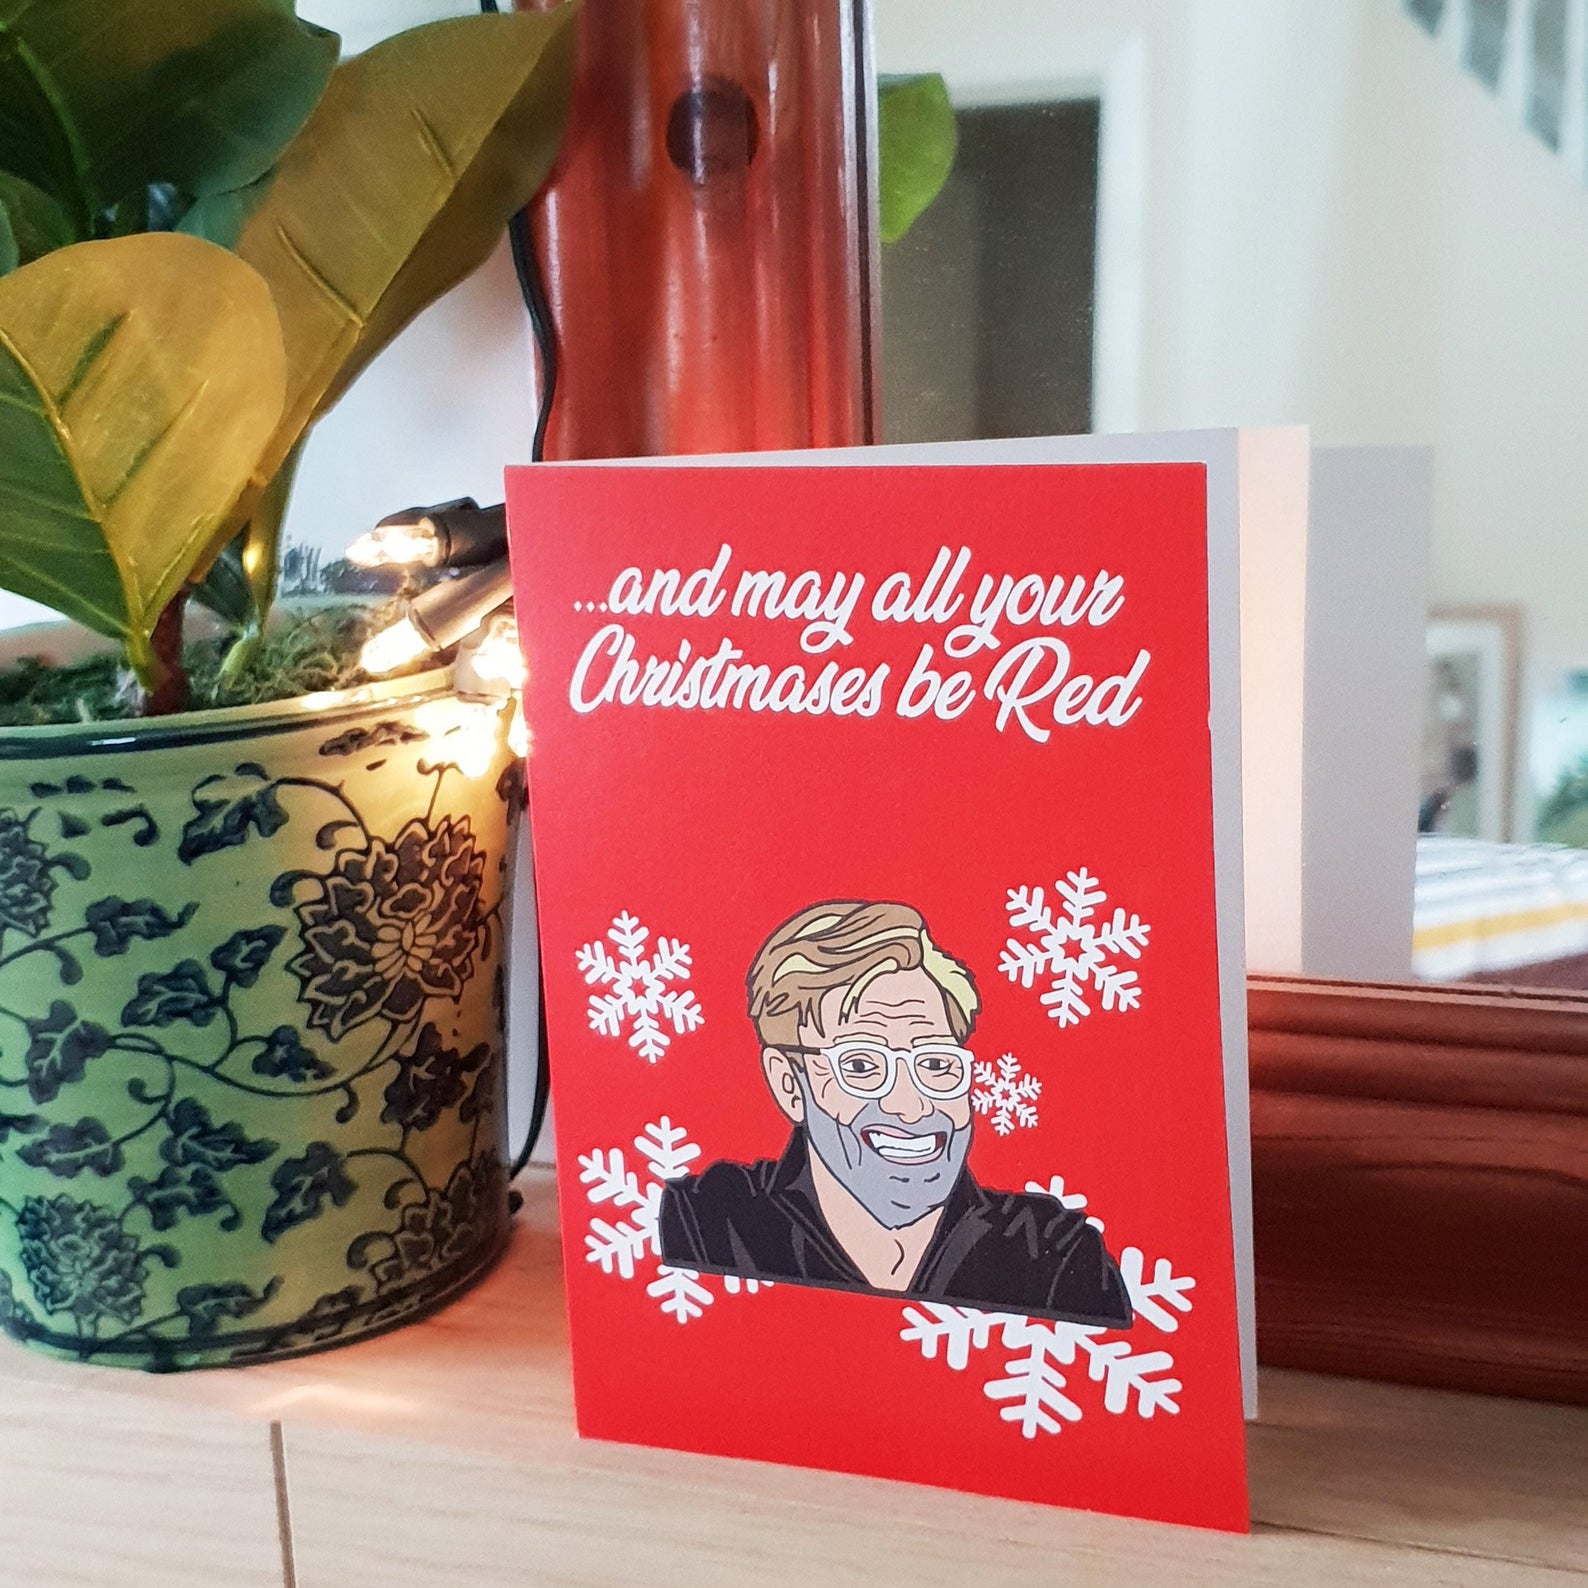 6 Ridiculously Awesome Liverpool FC Christmas Cards